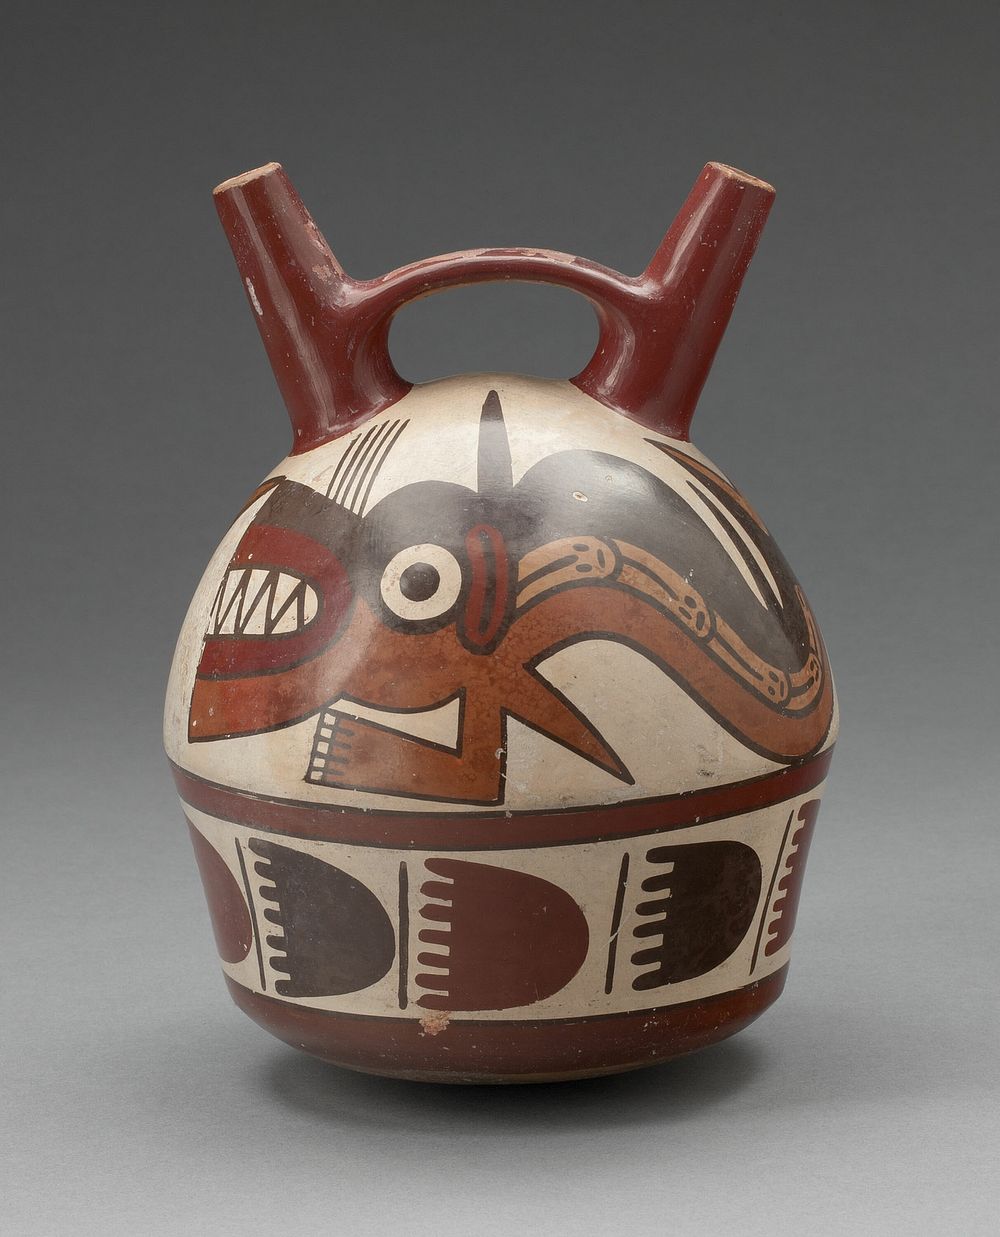 Double Spout Vessel Depicting an Abstract Shark with Human Attributes by Nazca